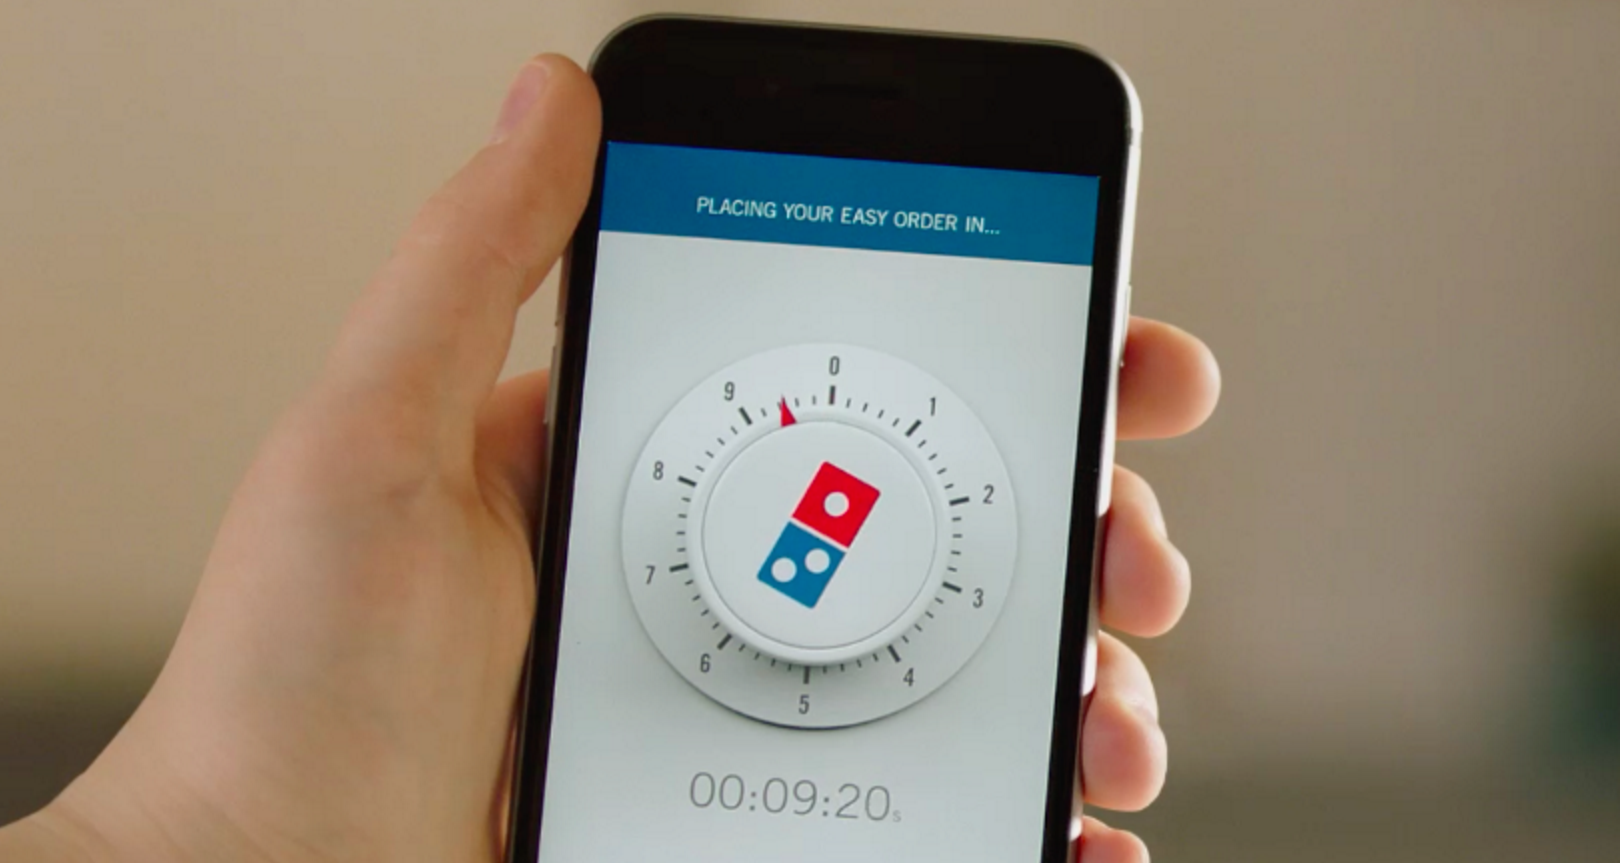 Domino’s New “Zero Click” Ordering App May Be A Butt-Dial Disaster Waiting To Happen